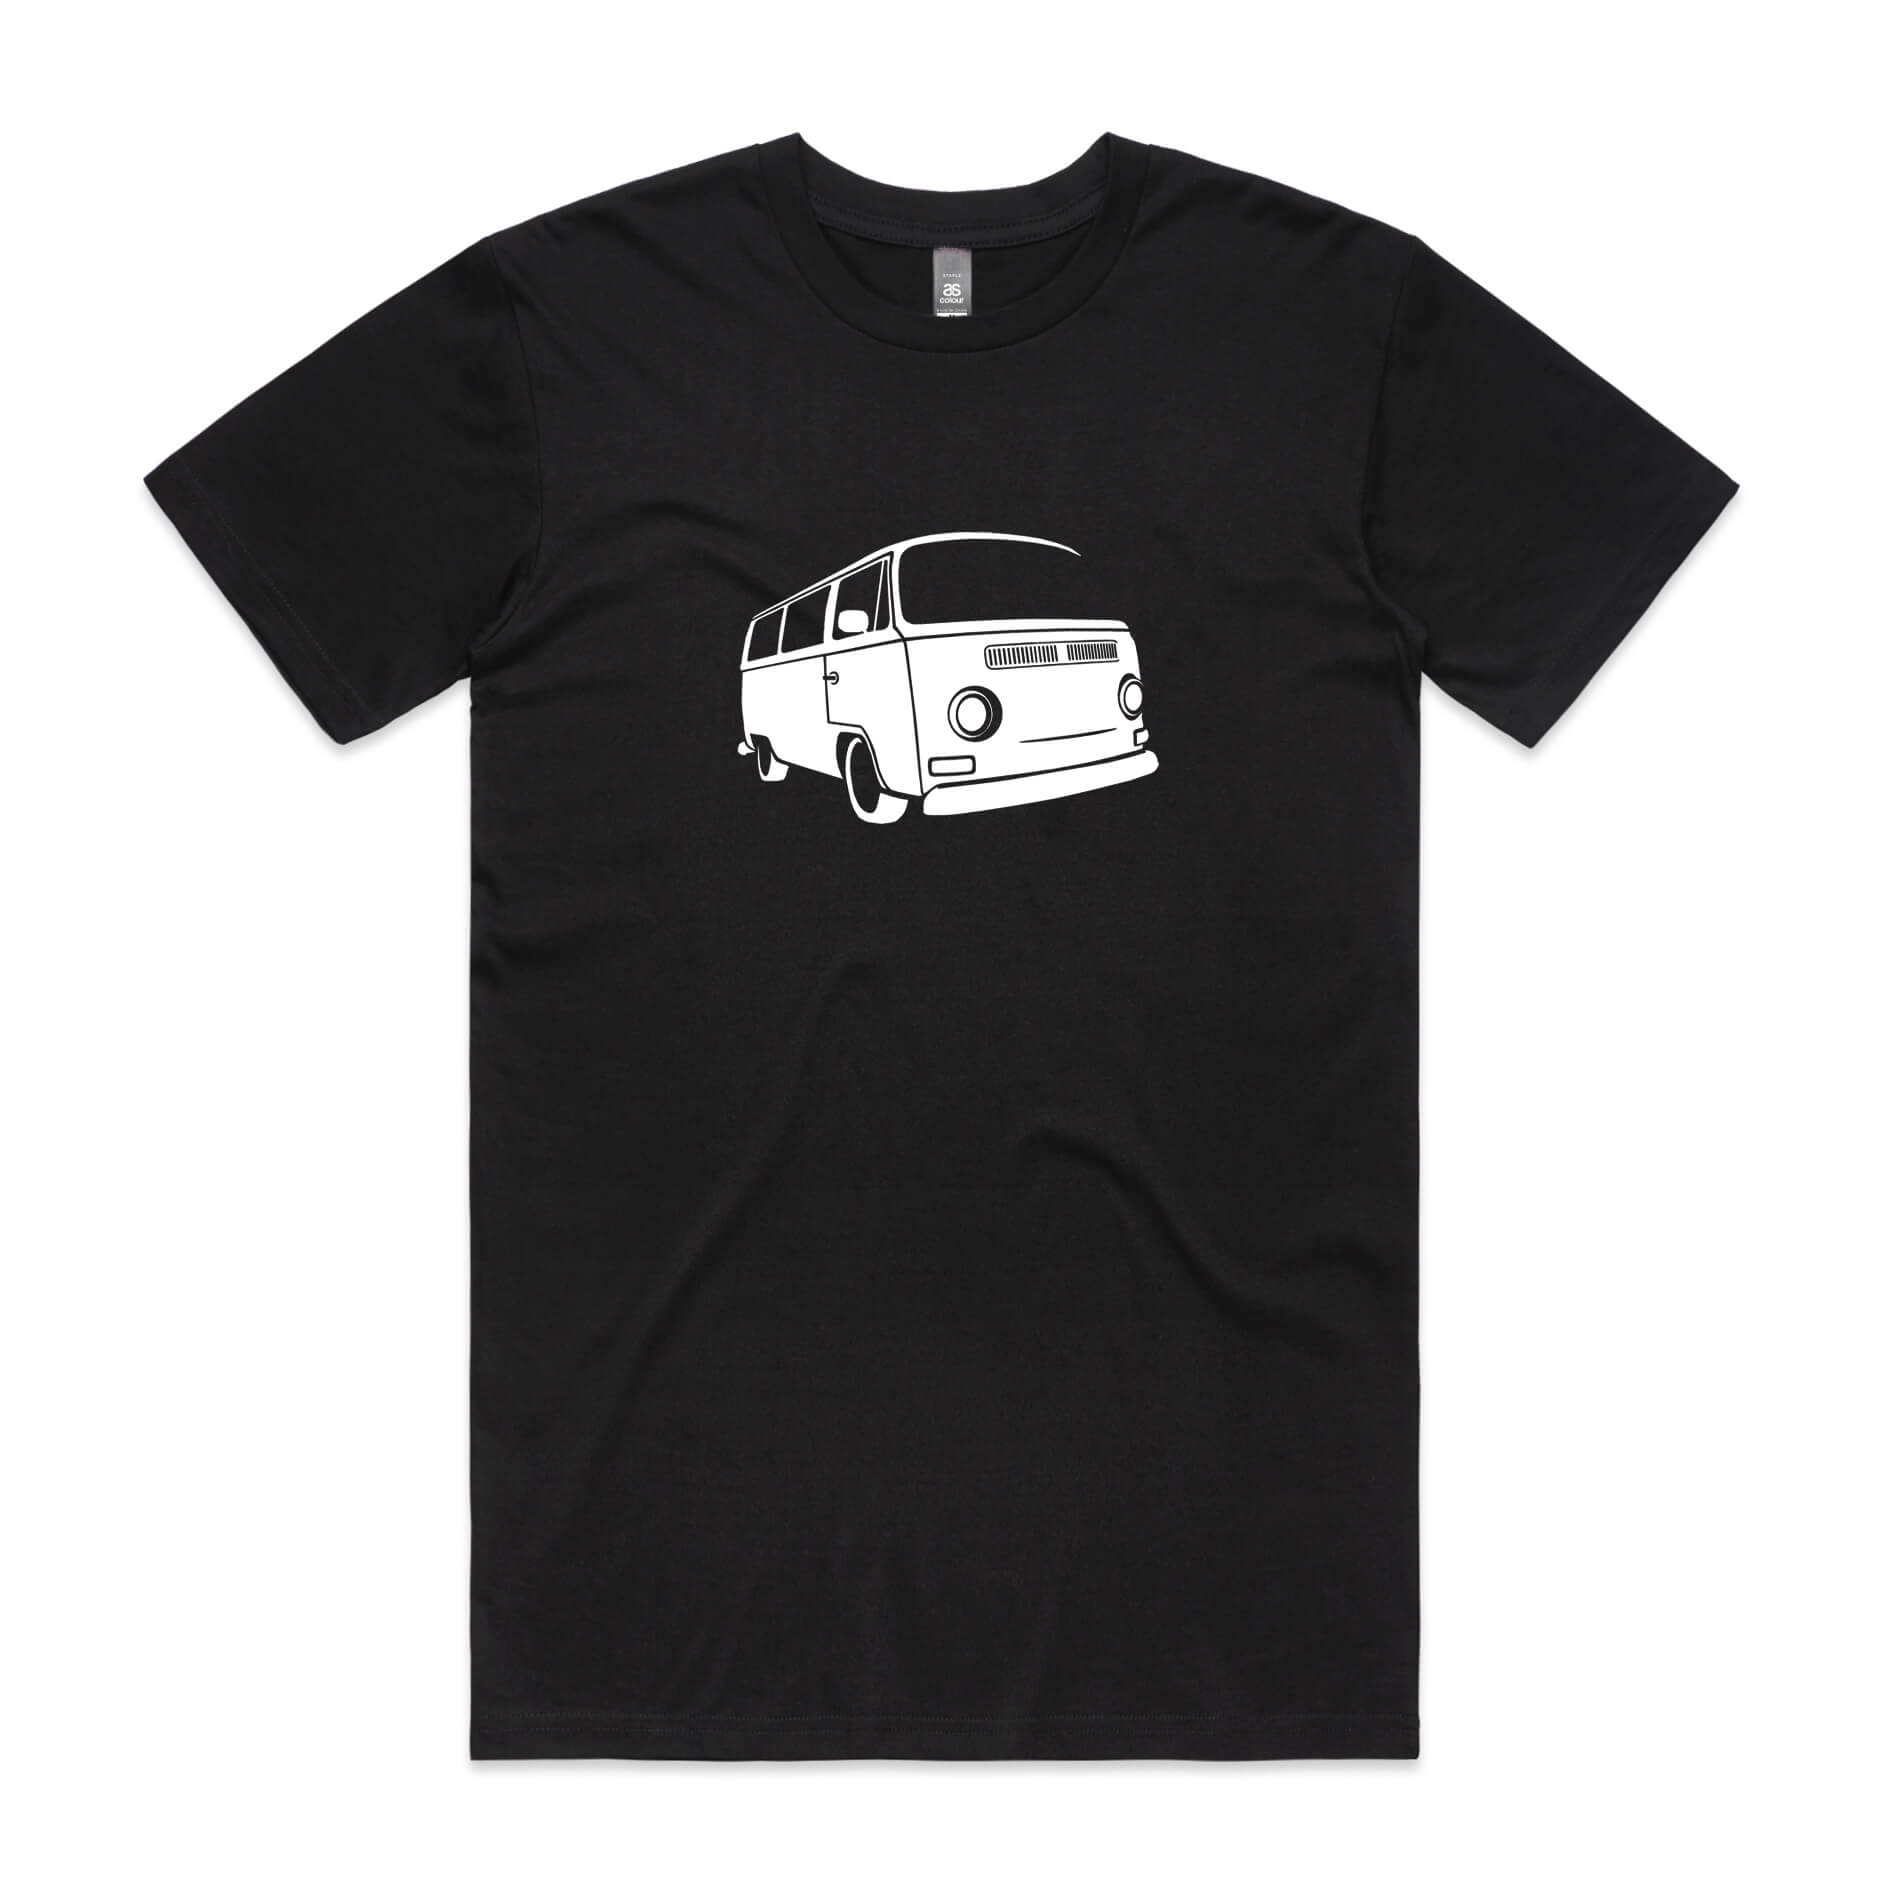 VW Kombi t-shirt in black with white Volkswagen bus graphic